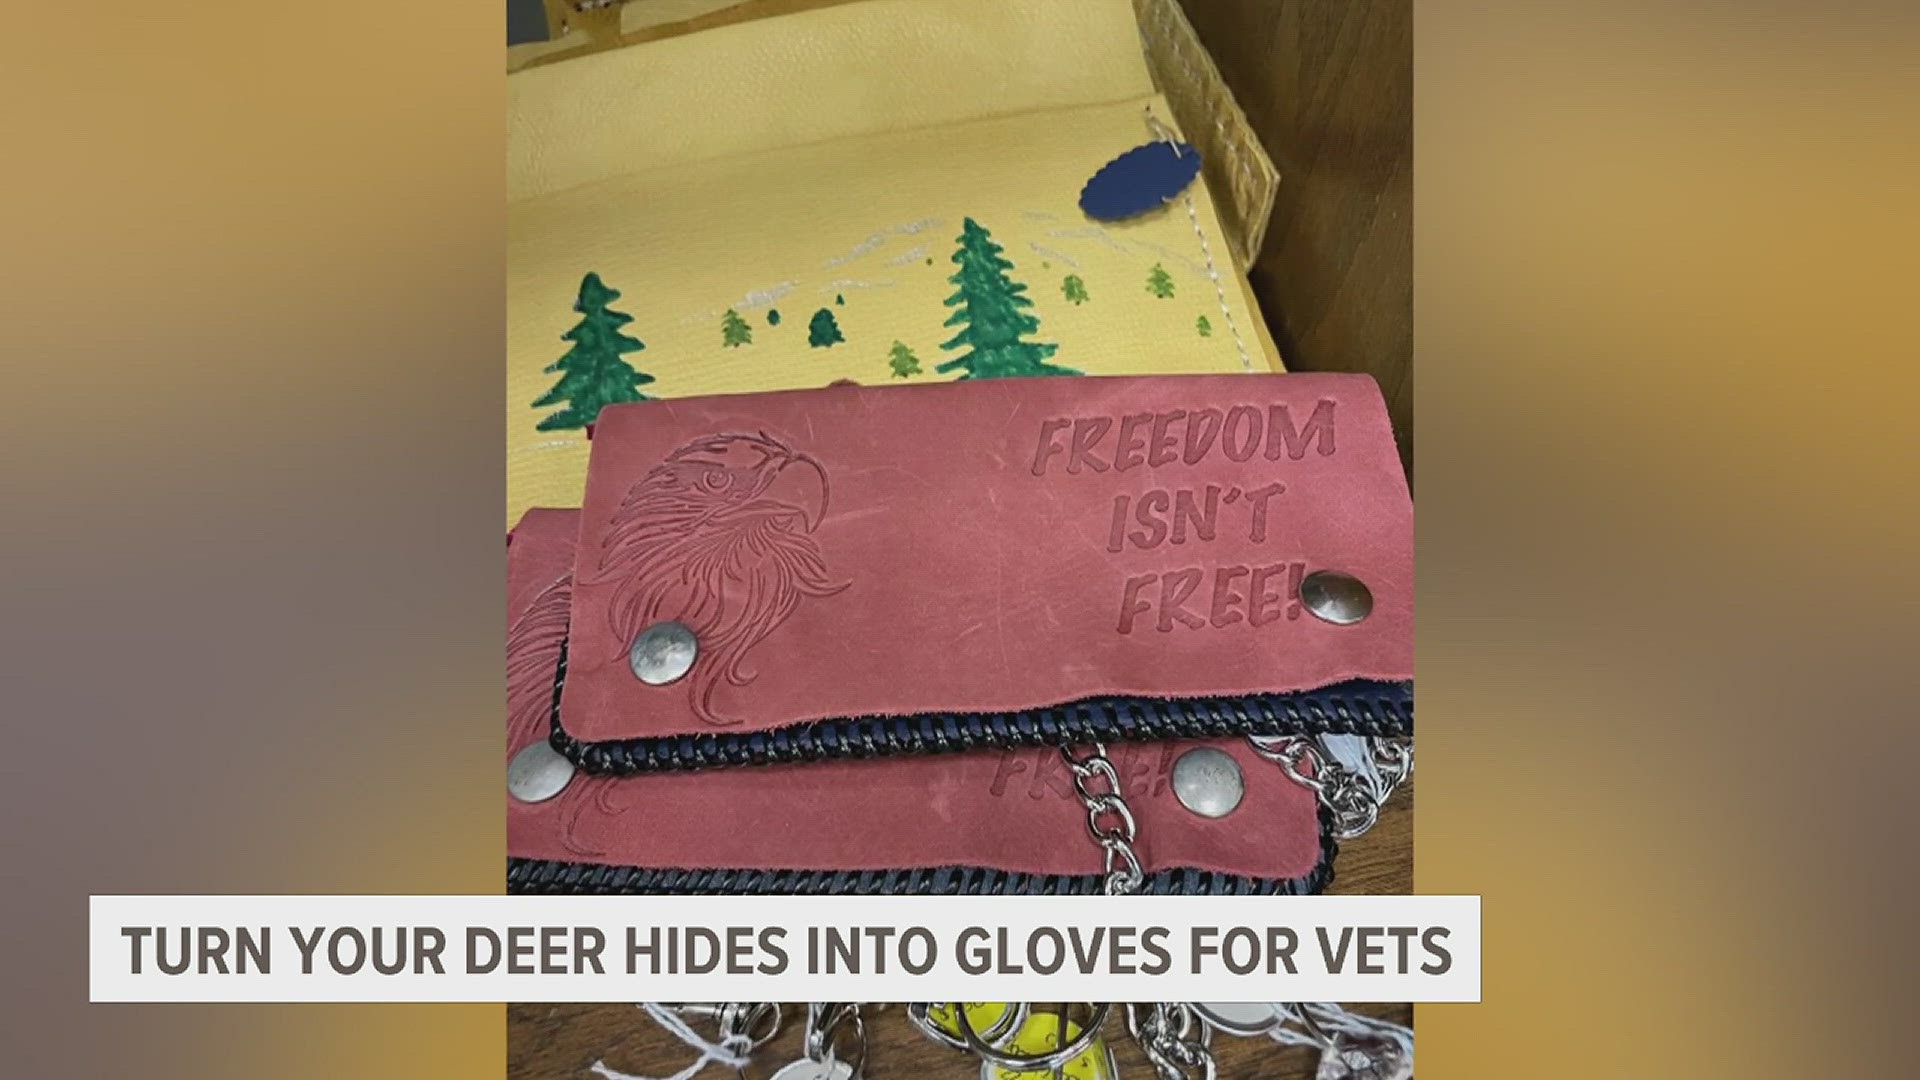 This hunting season, the Elks Lodge of Iowa will take donated deer hides to turn into leather gloves and goods for area veterans.